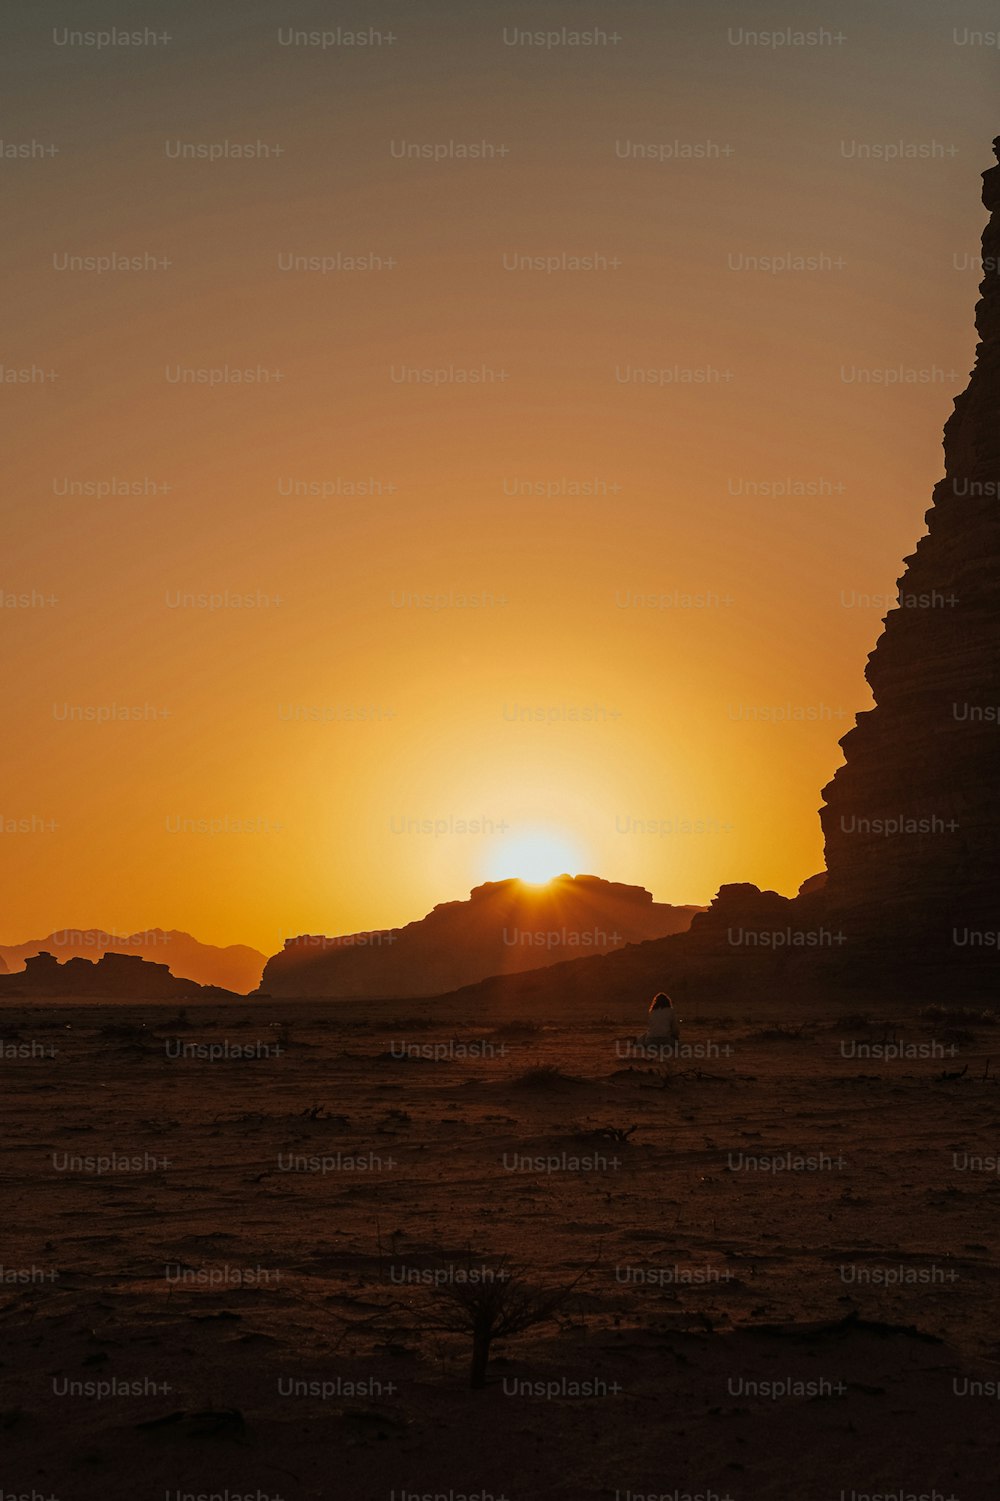 the sun is setting behind a pyramid in the desert